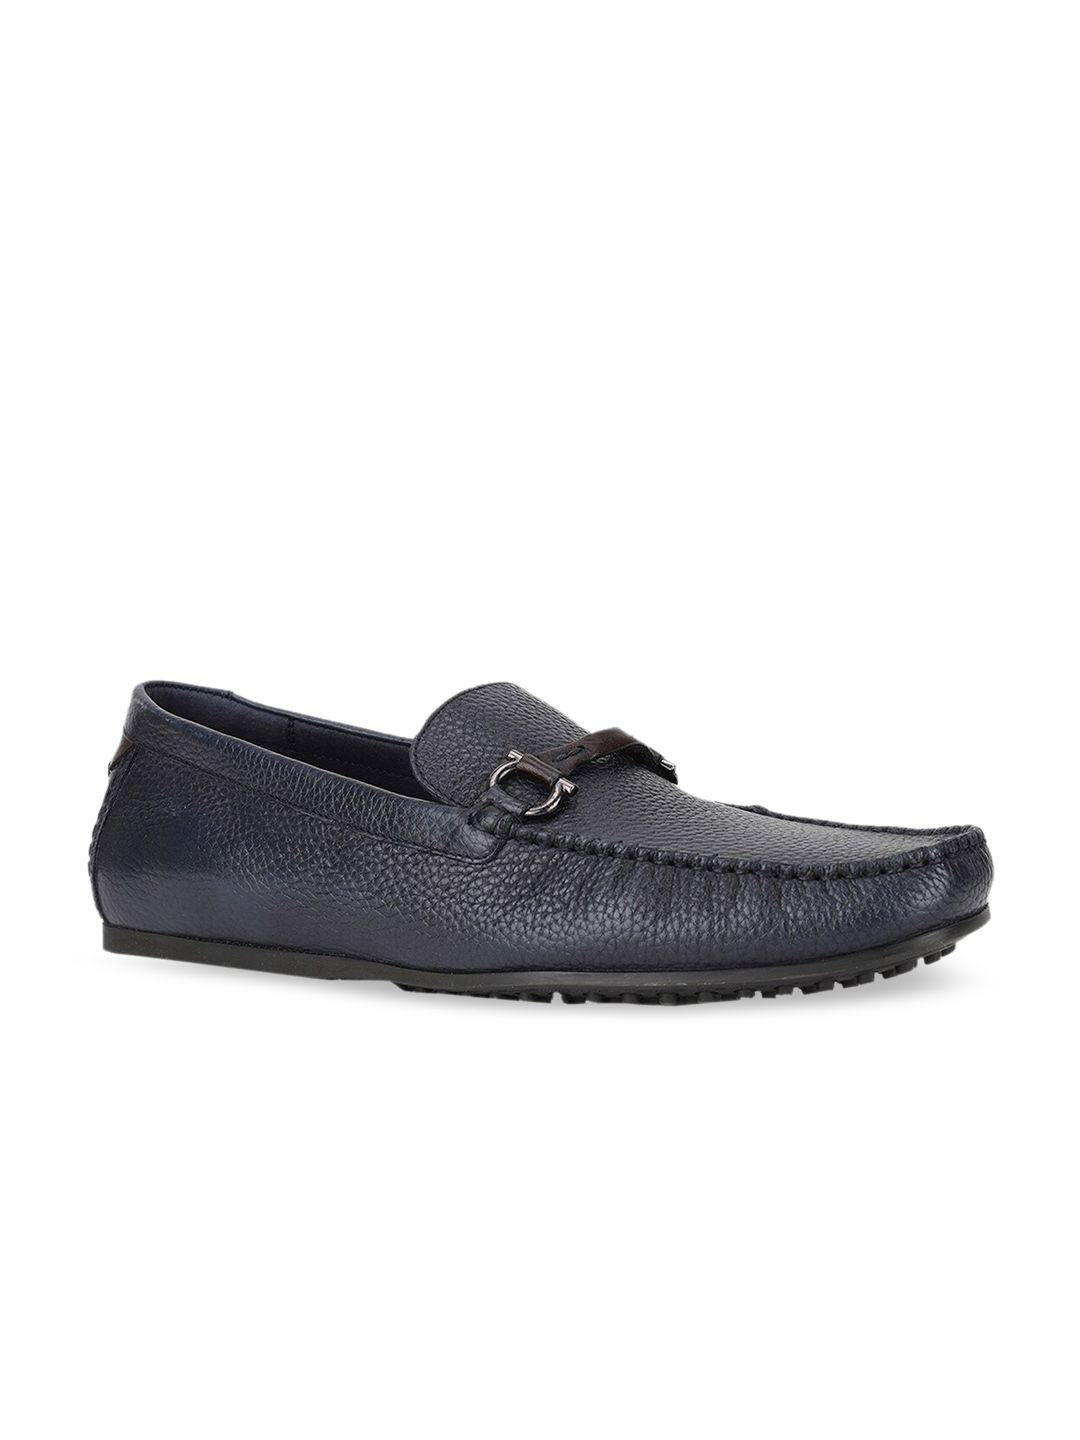 hush puppies men blue textured leather loafers